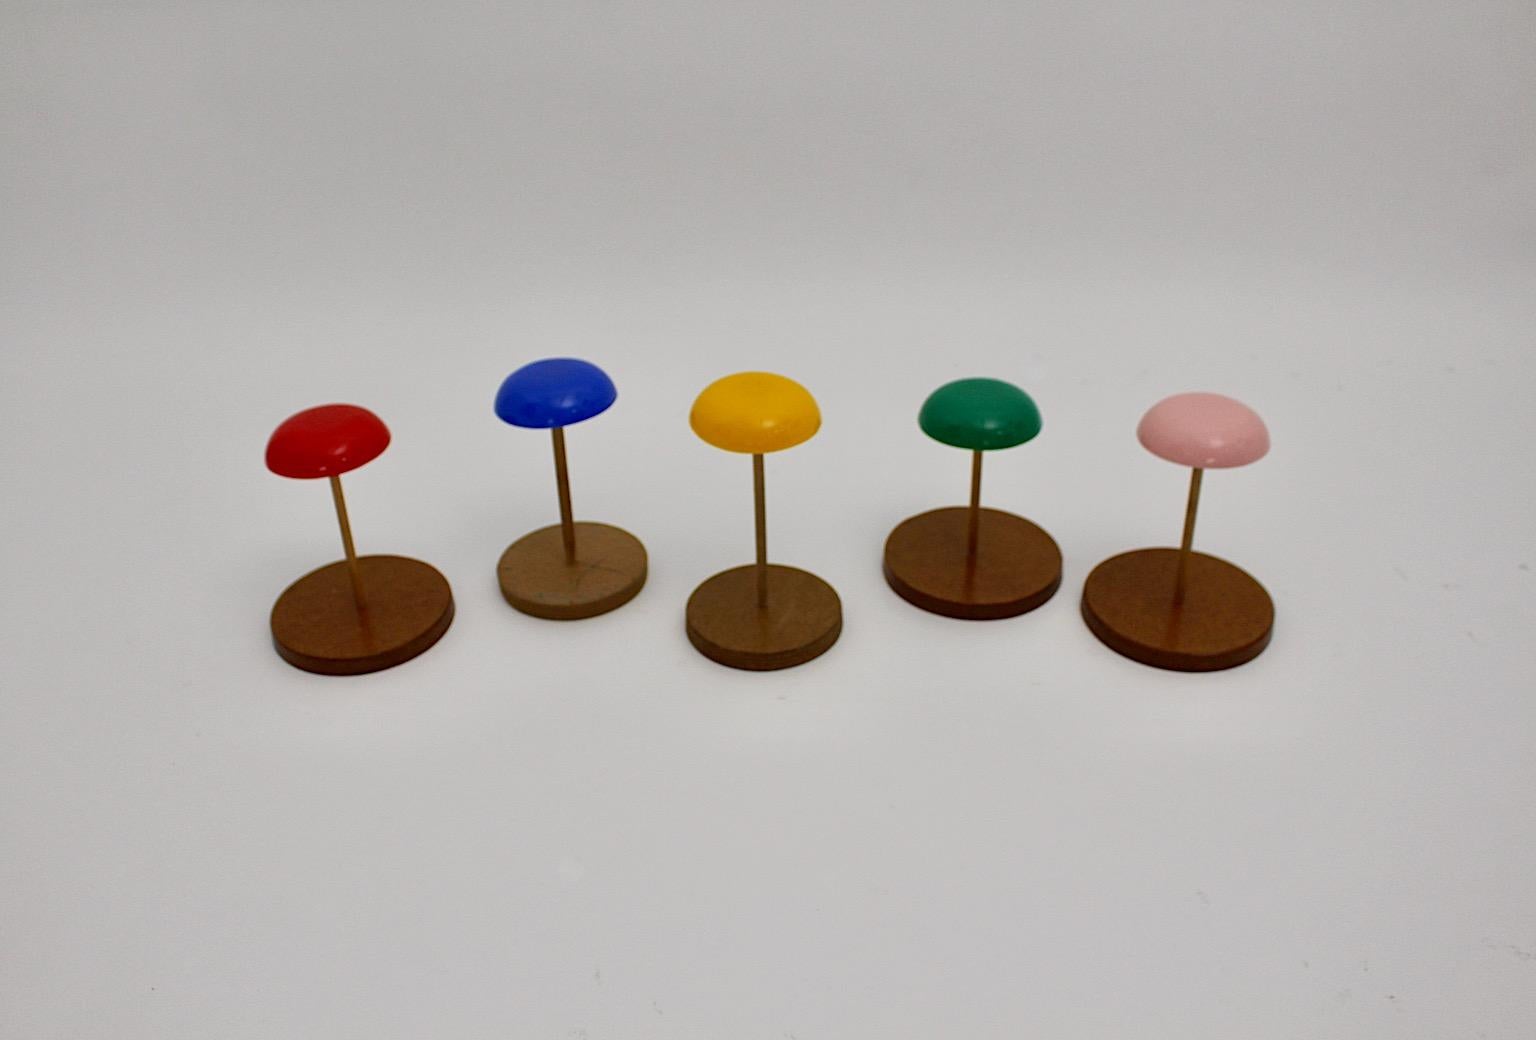 Space Age vintage hat stands or hat racks multicolored plastic and plywood 1960s Austra.
A stunning collection from multicolored bold hat stands in colorful variants.
While the hat shows colorful plastic, the stem and the circular base was made